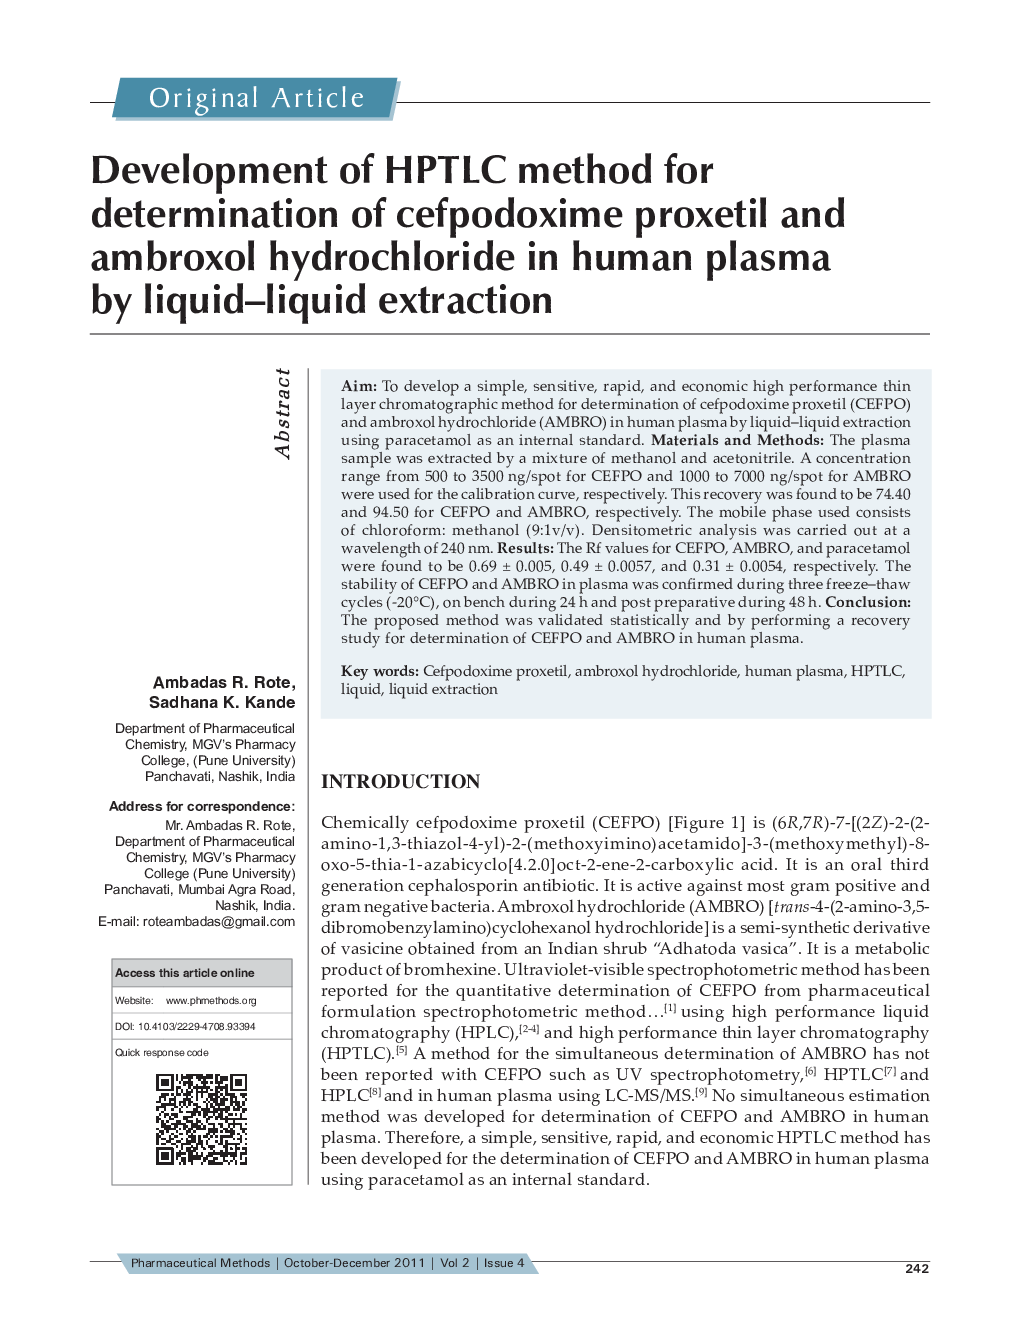 Development of HPTLC method for determination of cefpodoxime proxetil and ambroxol hydrochloride in human plasma by liquid-liquid extraction